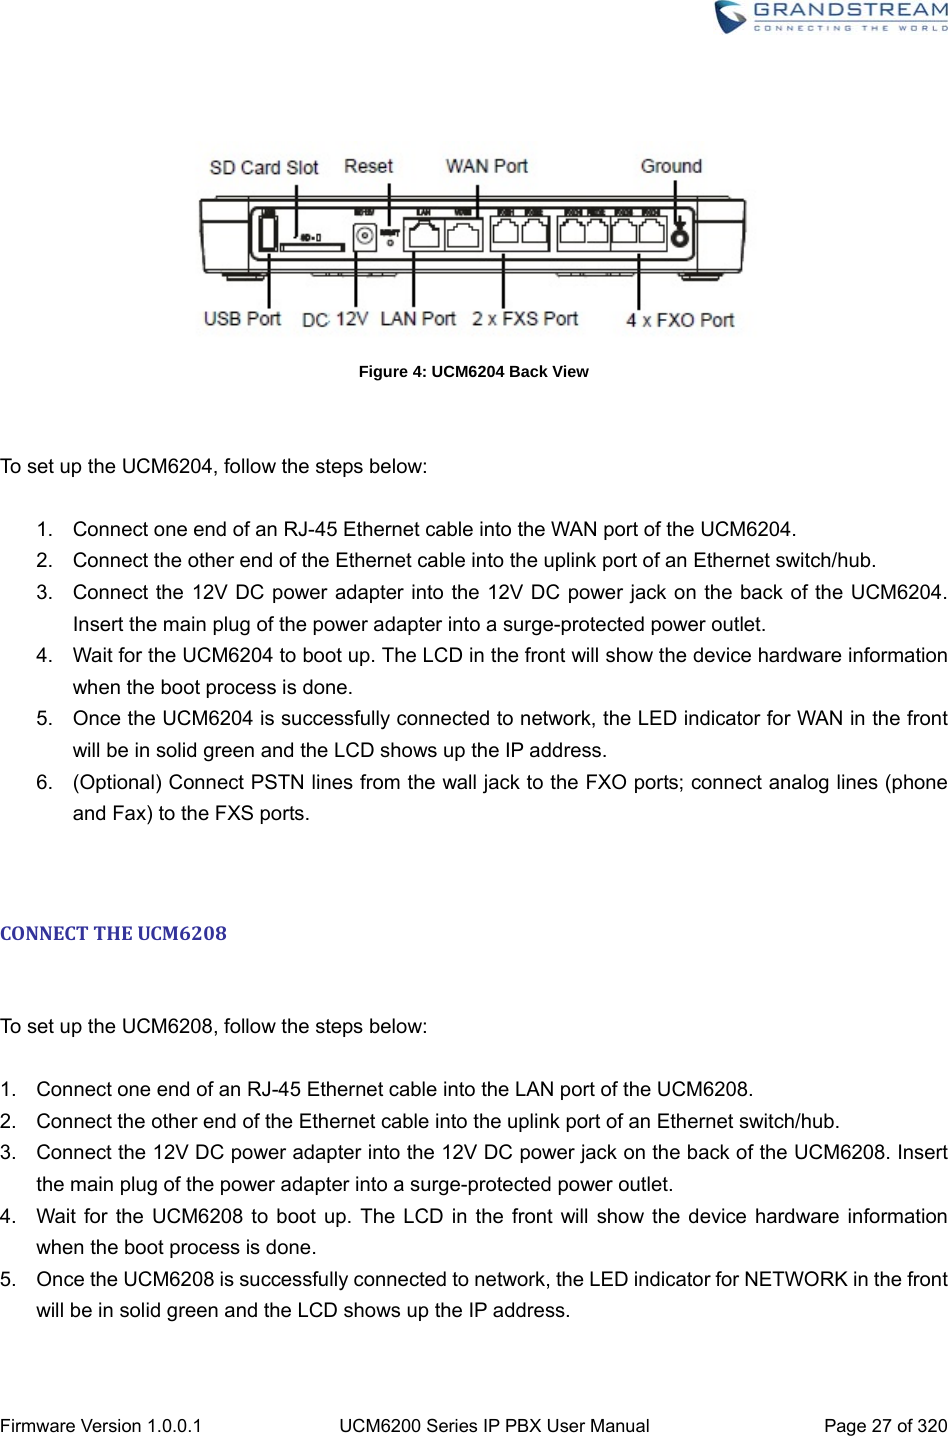  Firmware Version 1.0.0.1  UCM6200 Series IP PBX User Manual  Page 27 of 320    Figure 4: UCM6204 Back View   To set up the UCM6204, follow the steps below:  1.  Connect one end of an RJ-45 Ethernet cable into the WAN port of the UCM6204. 2.  Connect the other end of the Ethernet cable into the uplink port of an Ethernet switch/hub. 3.  Connect the 12V DC power adapter into the 12V DC power jack on the back of the UCM6204. Insert the main plug of the power adapter into a surge-protected power outlet. 4.  Wait for the UCM6204 to boot up. The LCD in the front will show the device hardware information when the boot process is done. 5.  Once the UCM6204 is successfully connected to network, the LED indicator for WAN in the front will be in solid green and the LCD shows up the IP address. 6.  (Optional) Connect PSTN lines from the wall jack to the FXO ports; connect analog lines (phone and Fax) to the FXS ports.   CONNECTTHEUCM6208 To set up the UCM6208, follow the steps below:  1.  Connect one end of an RJ-45 Ethernet cable into the LAN port of the UCM6208. 2.  Connect the other end of the Ethernet cable into the uplink port of an Ethernet switch/hub. 3.  Connect the 12V DC power adapter into the 12V DC power jack on the back of the UCM6208. Insert the main plug of the power adapter into a surge-protected power outlet. 4.  Wait for the UCM6208 to boot up. The LCD in the front will show the device hardware information when the boot process is done. 5.  Once the UCM6208 is successfully connected to network, the LED indicator for NETWORK in the front will be in solid green and the LCD shows up the IP address. 